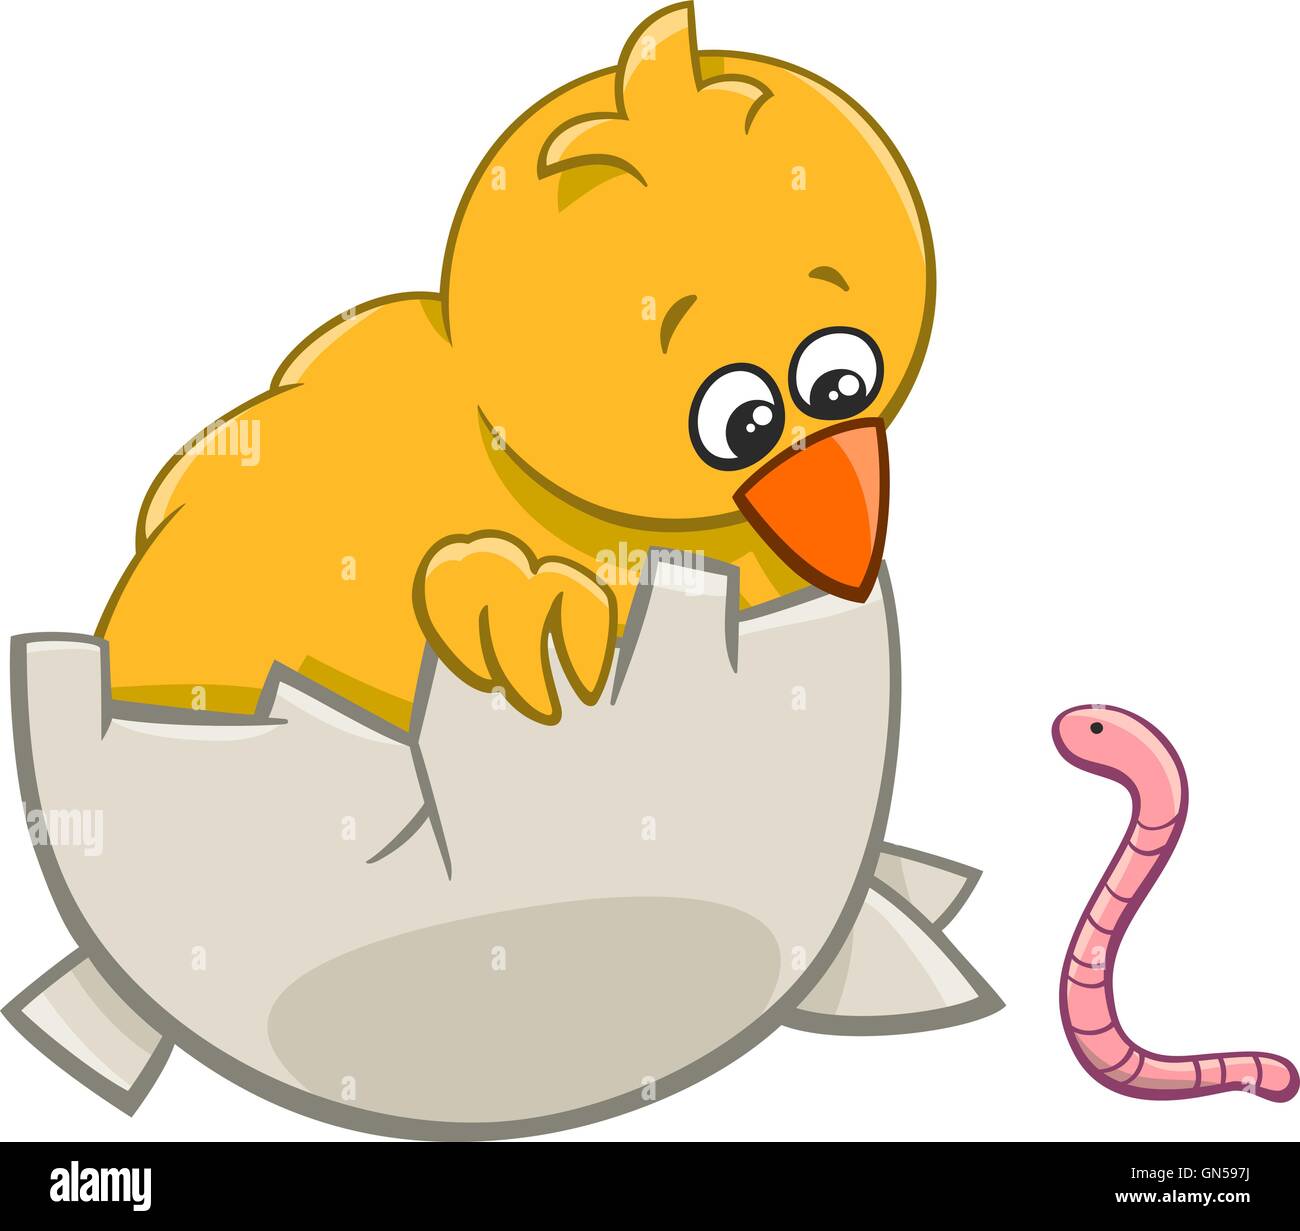 chick with warm cartoon Stock Vector